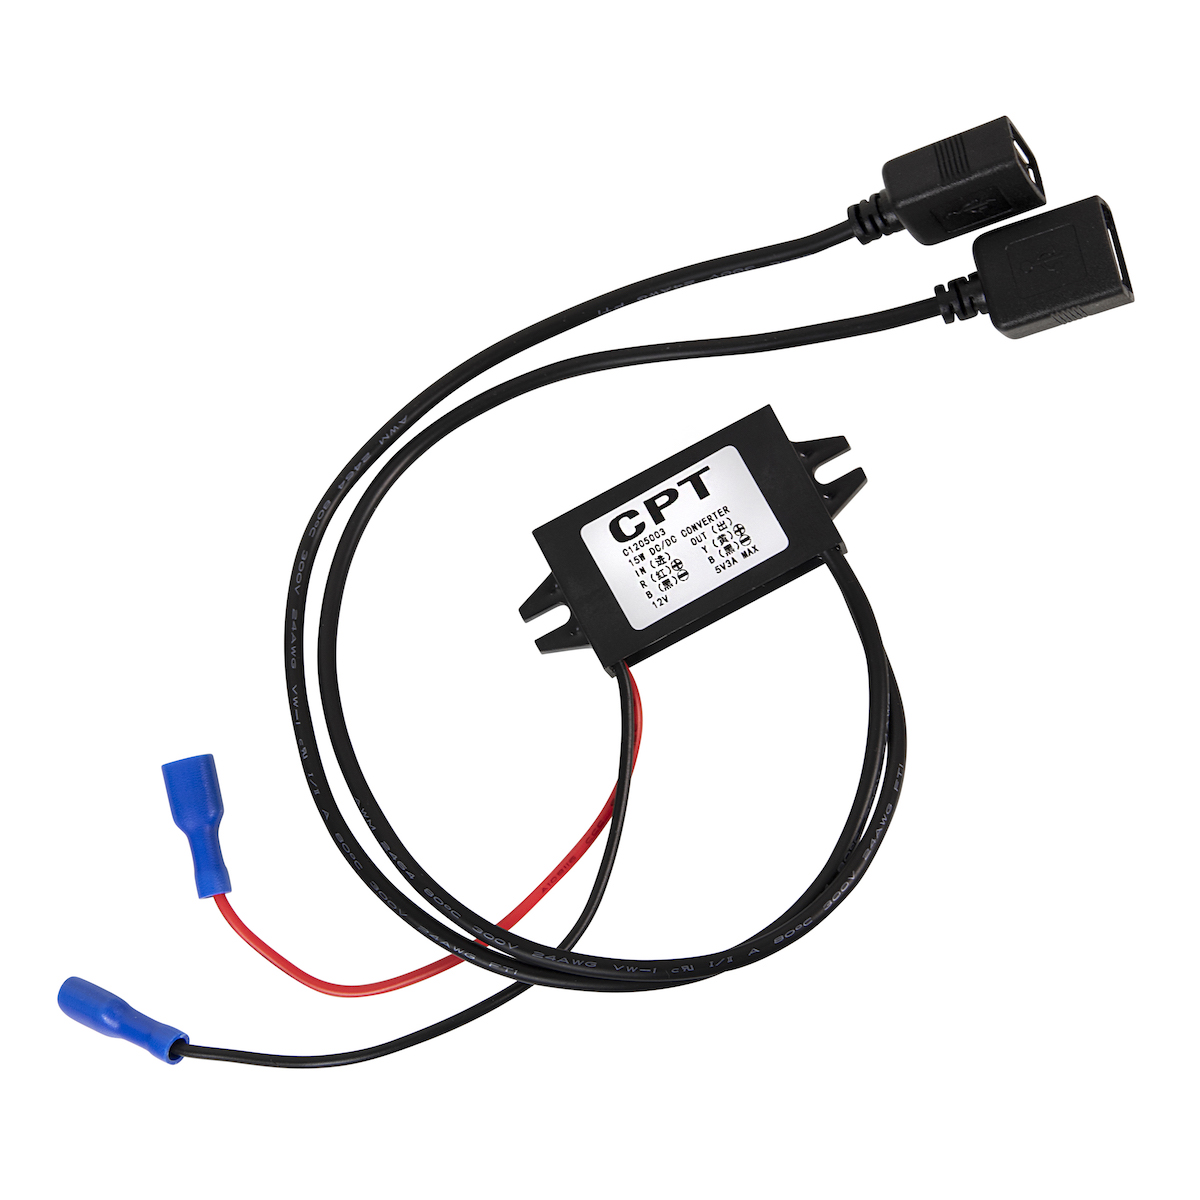 USB Adapter Duo Faston product image